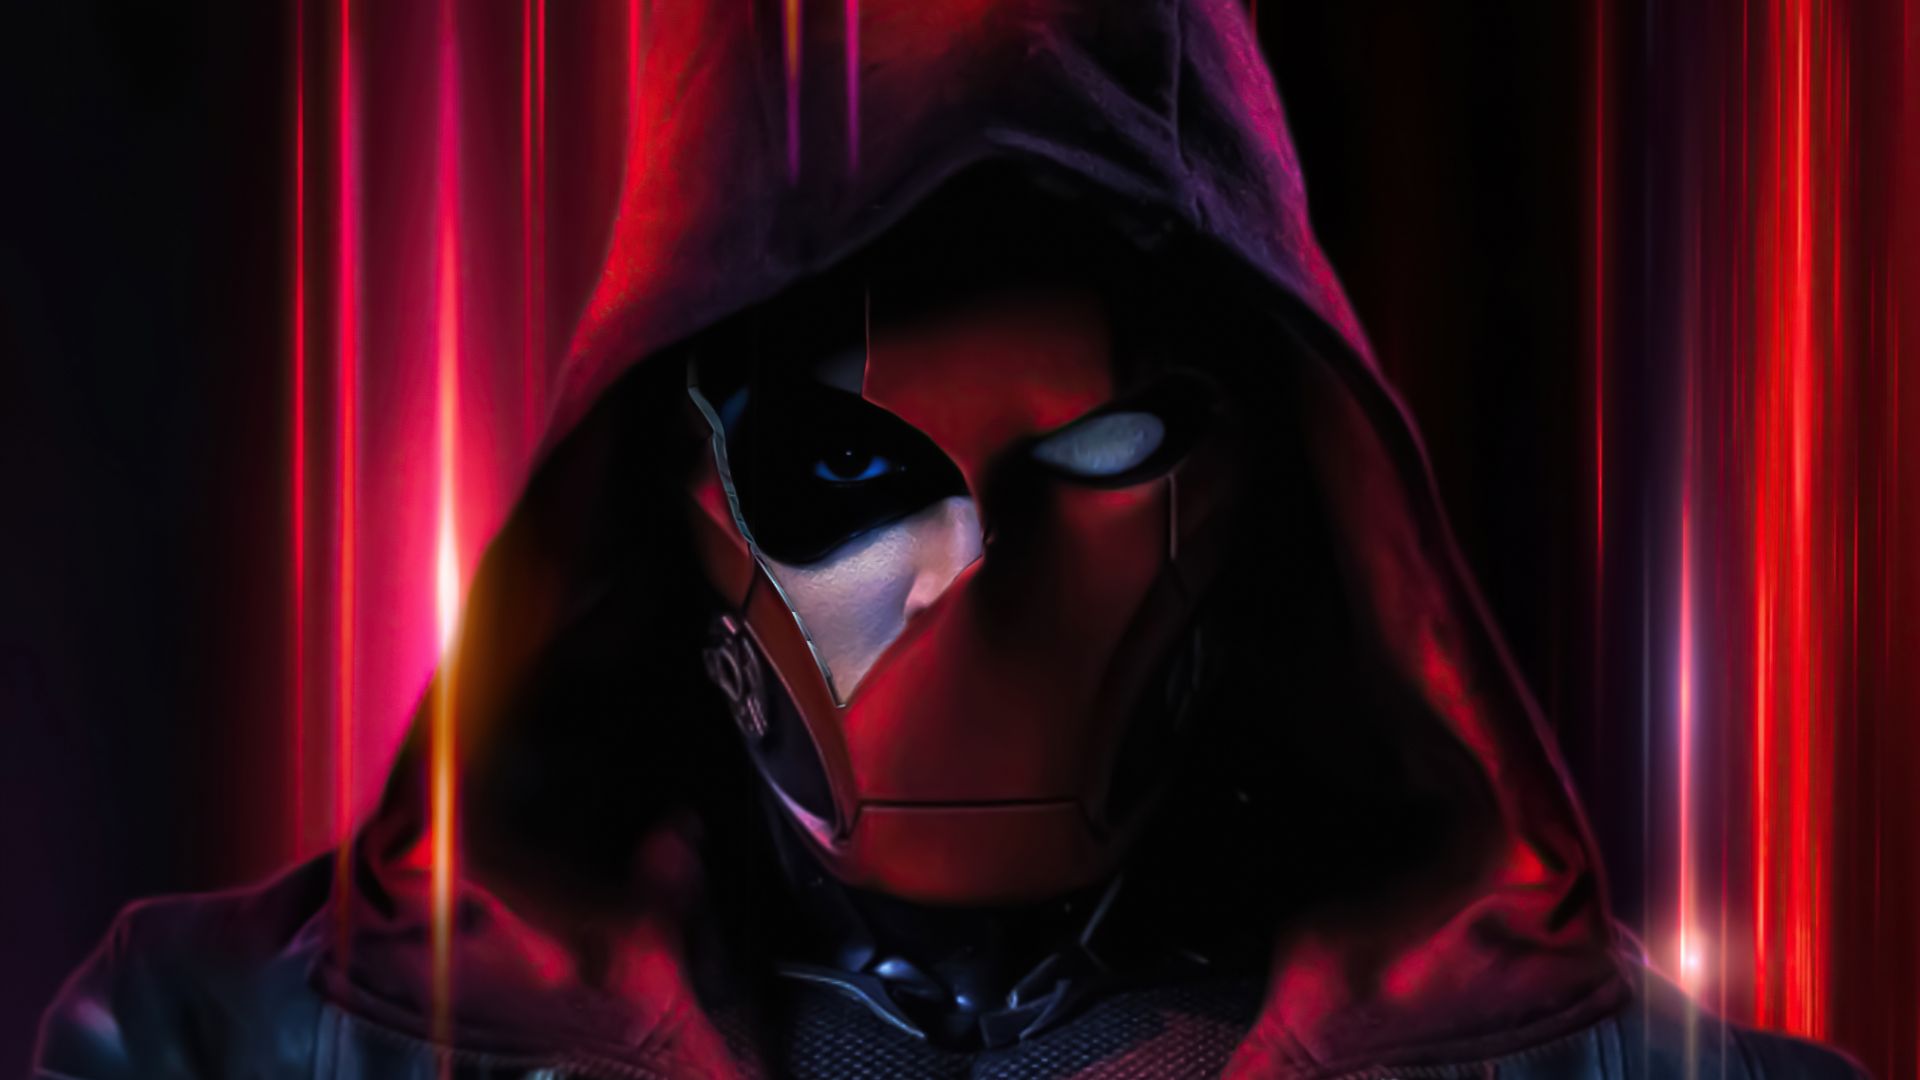 1080x1920 2020 Red Hood 4k Iphone 76s6 Plus Pixel xl One Plus 33t5 HD  4k Wallpapers Images Backgrounds Photos and Pictures